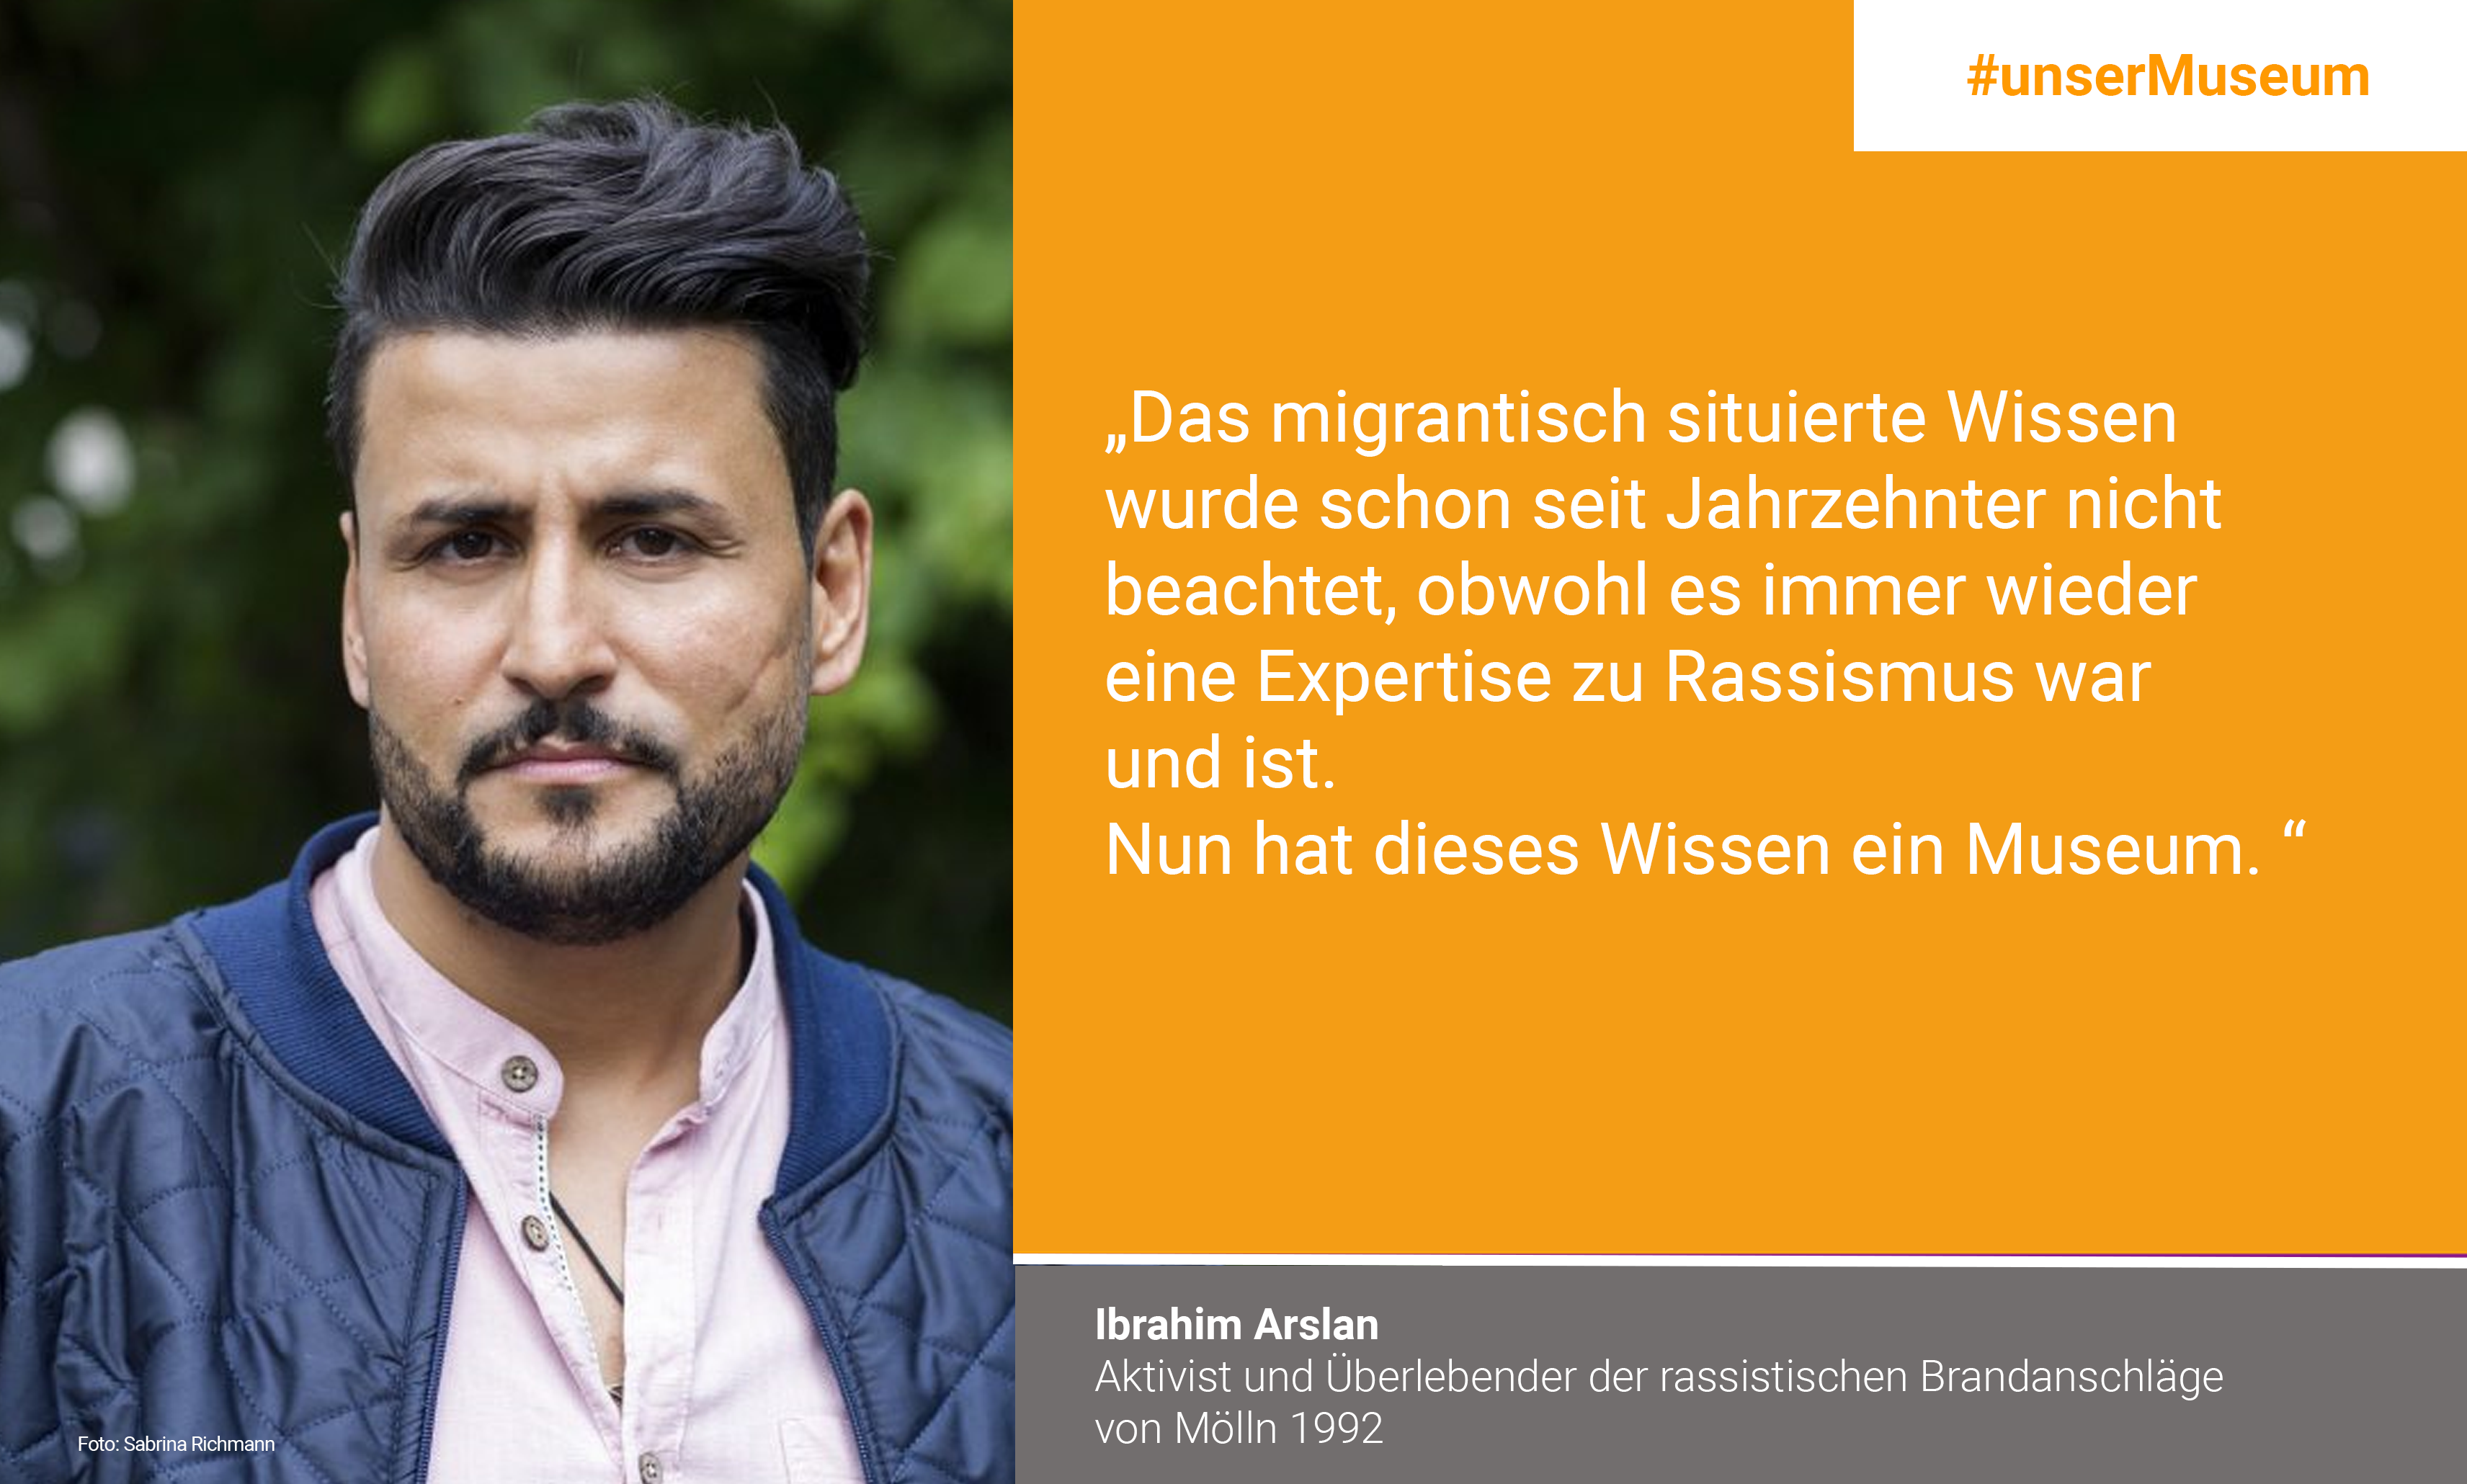 İbrahim Arslan, Activist and survivor of the racist arson attacks in Mölln 1992: "Migrant-situated knowledge has not been considered for decades, although it has always been and remains expert knowledge concerning racism. This knowledge now has a museum."